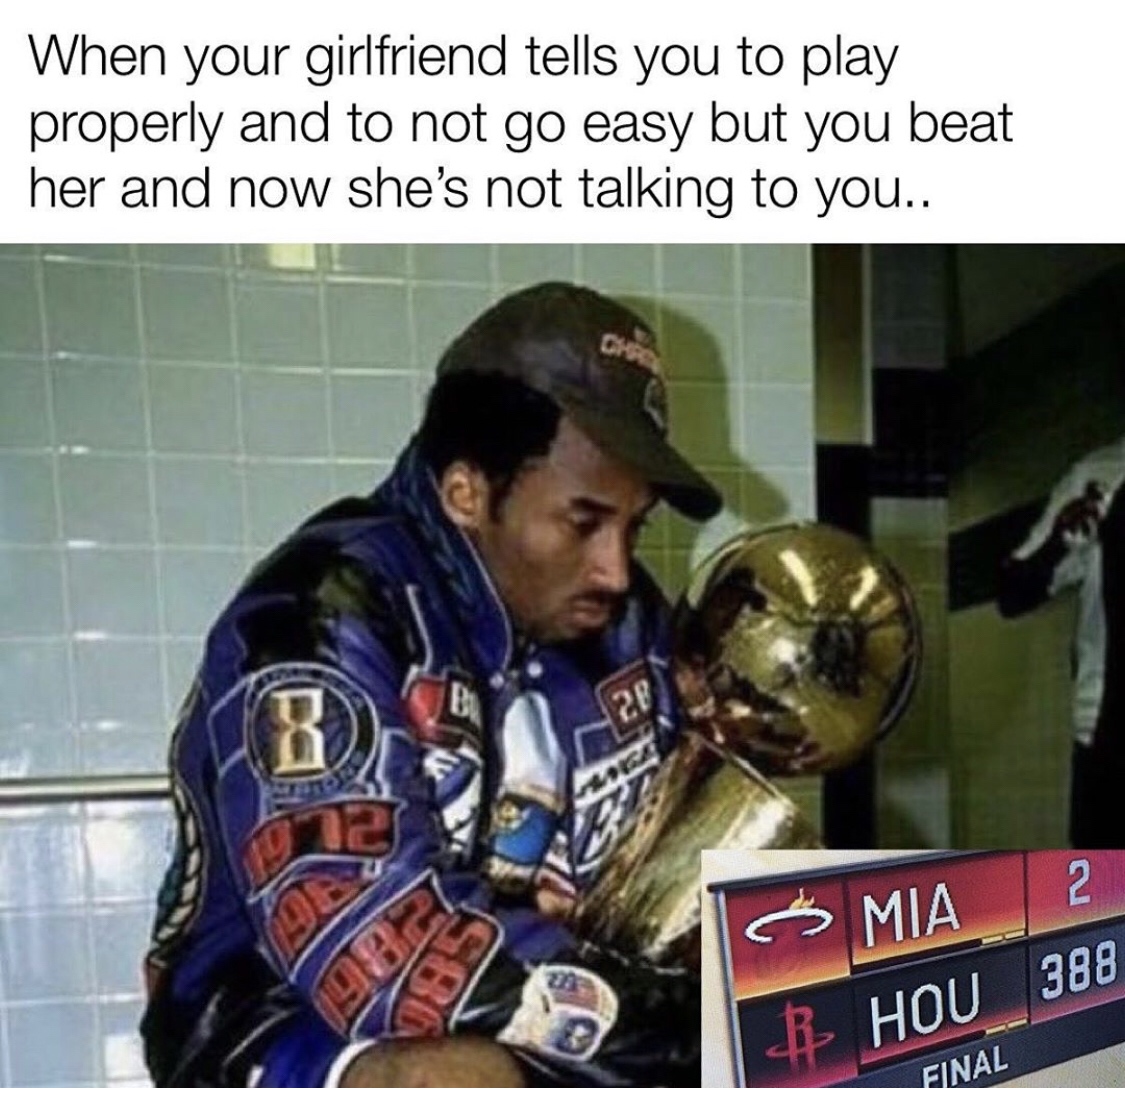 promotion meme funny - When your girlfriend tells you to play properly and to not go easy but you beat her and now she's not talking to you.. Smia ? Sbu B Hou 388 Final